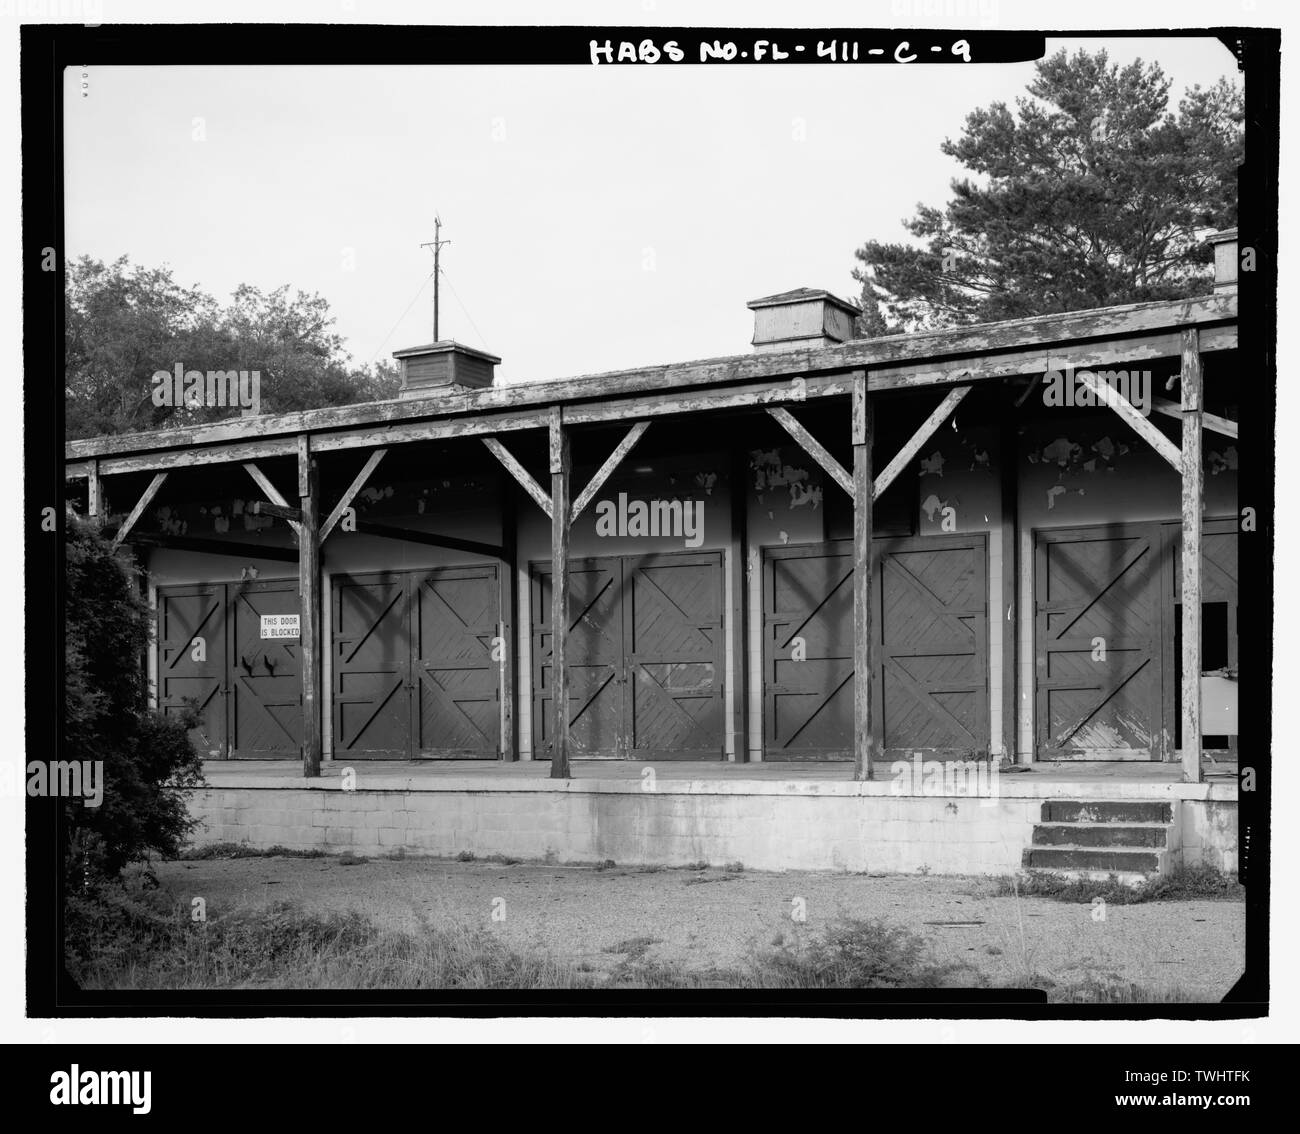 SHOP BAYS ON THE WEST FACADE, LOOKING NORTHEAST - Eglin Air Force Base, Motor Repair Shop, Northwest of Flager Road, Chisk Lane and southern edge of Weekly Bayou, Valparaiso, Okaloosa County, FL Stock Photo